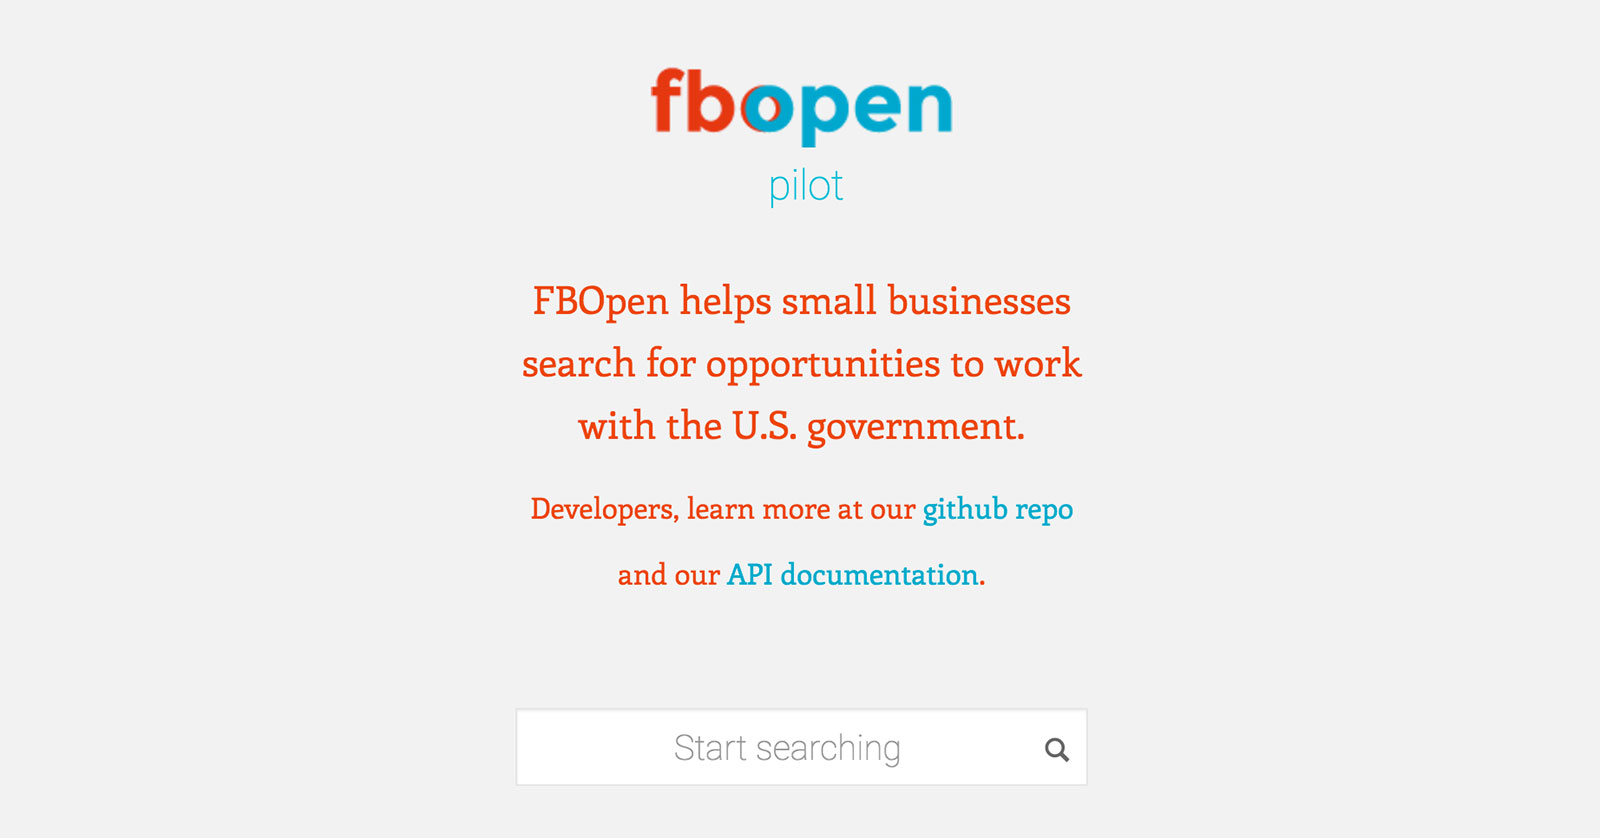 The FBopen homepage